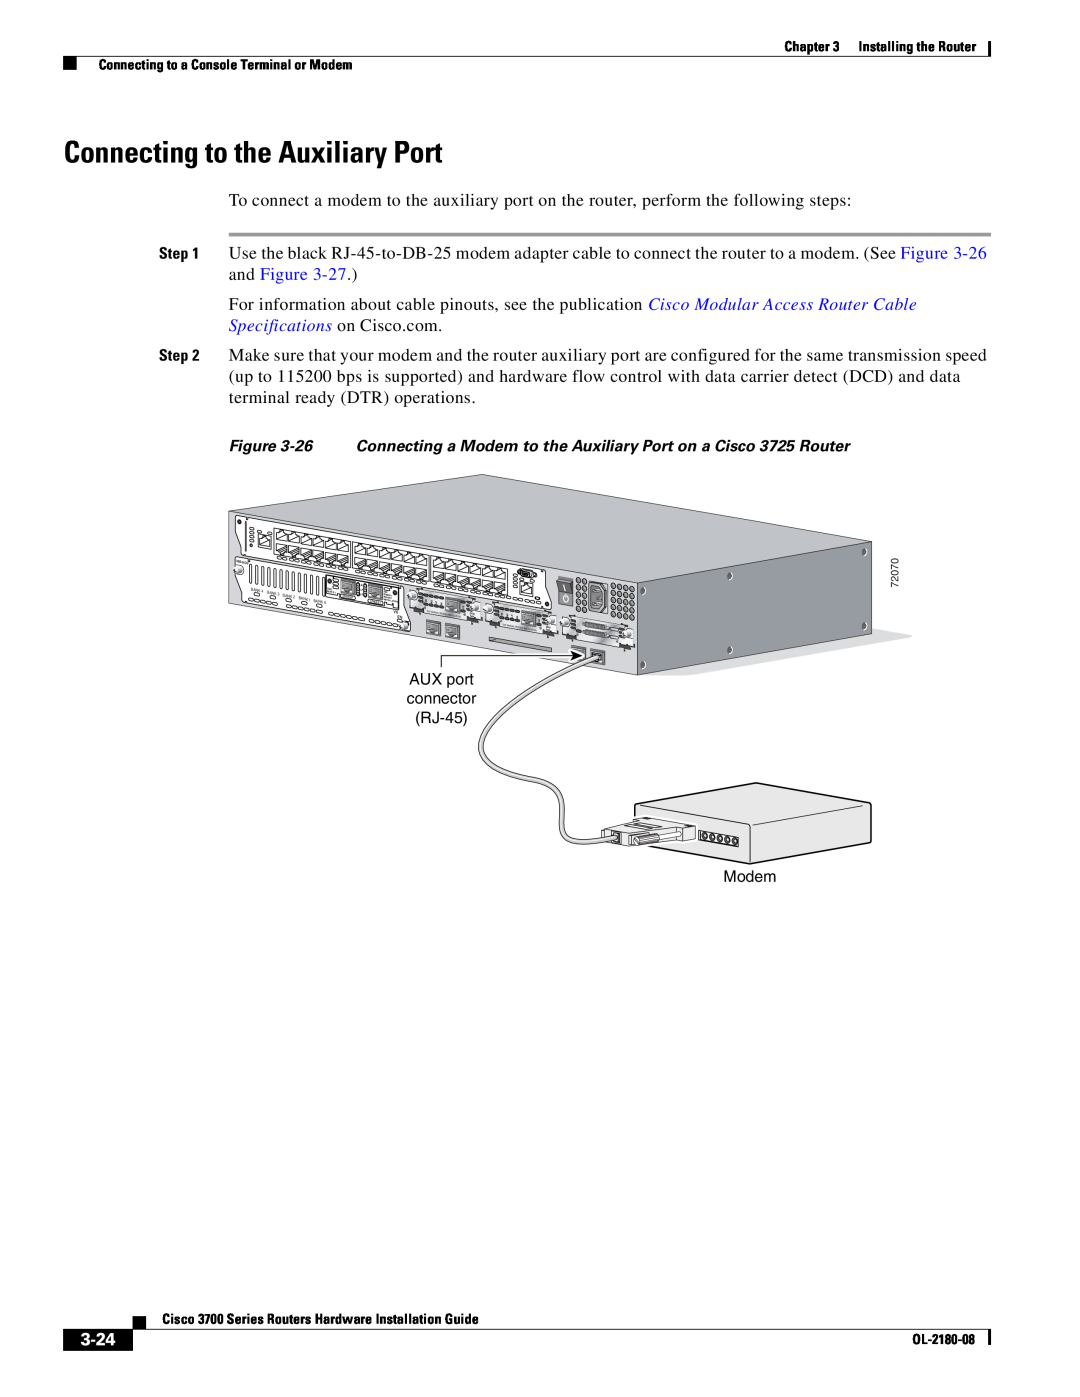 Cisco Systems 3700 Series manual Connecting to the Auxiliary Port, 3-24, Specifications on Cisco.com 